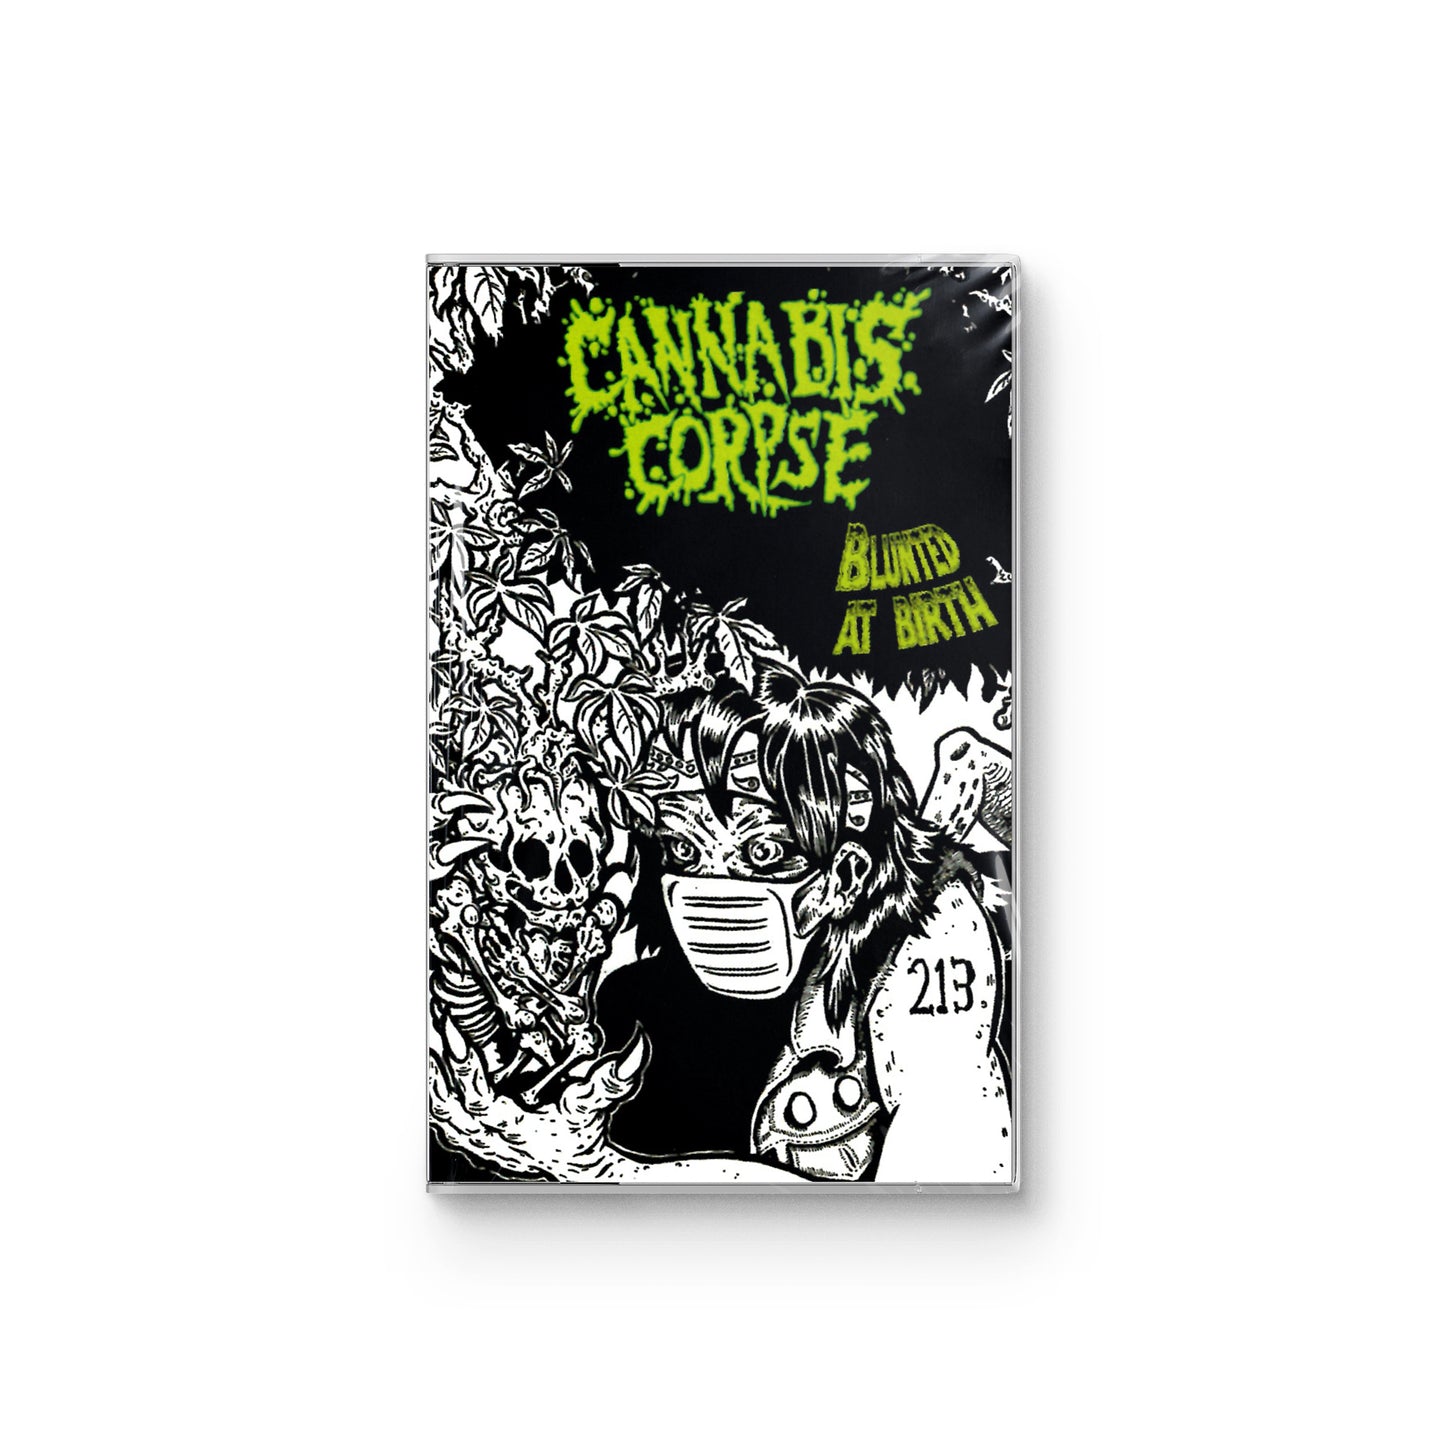 Cannabis Corpse "Blunted At Birth" CASSETTE